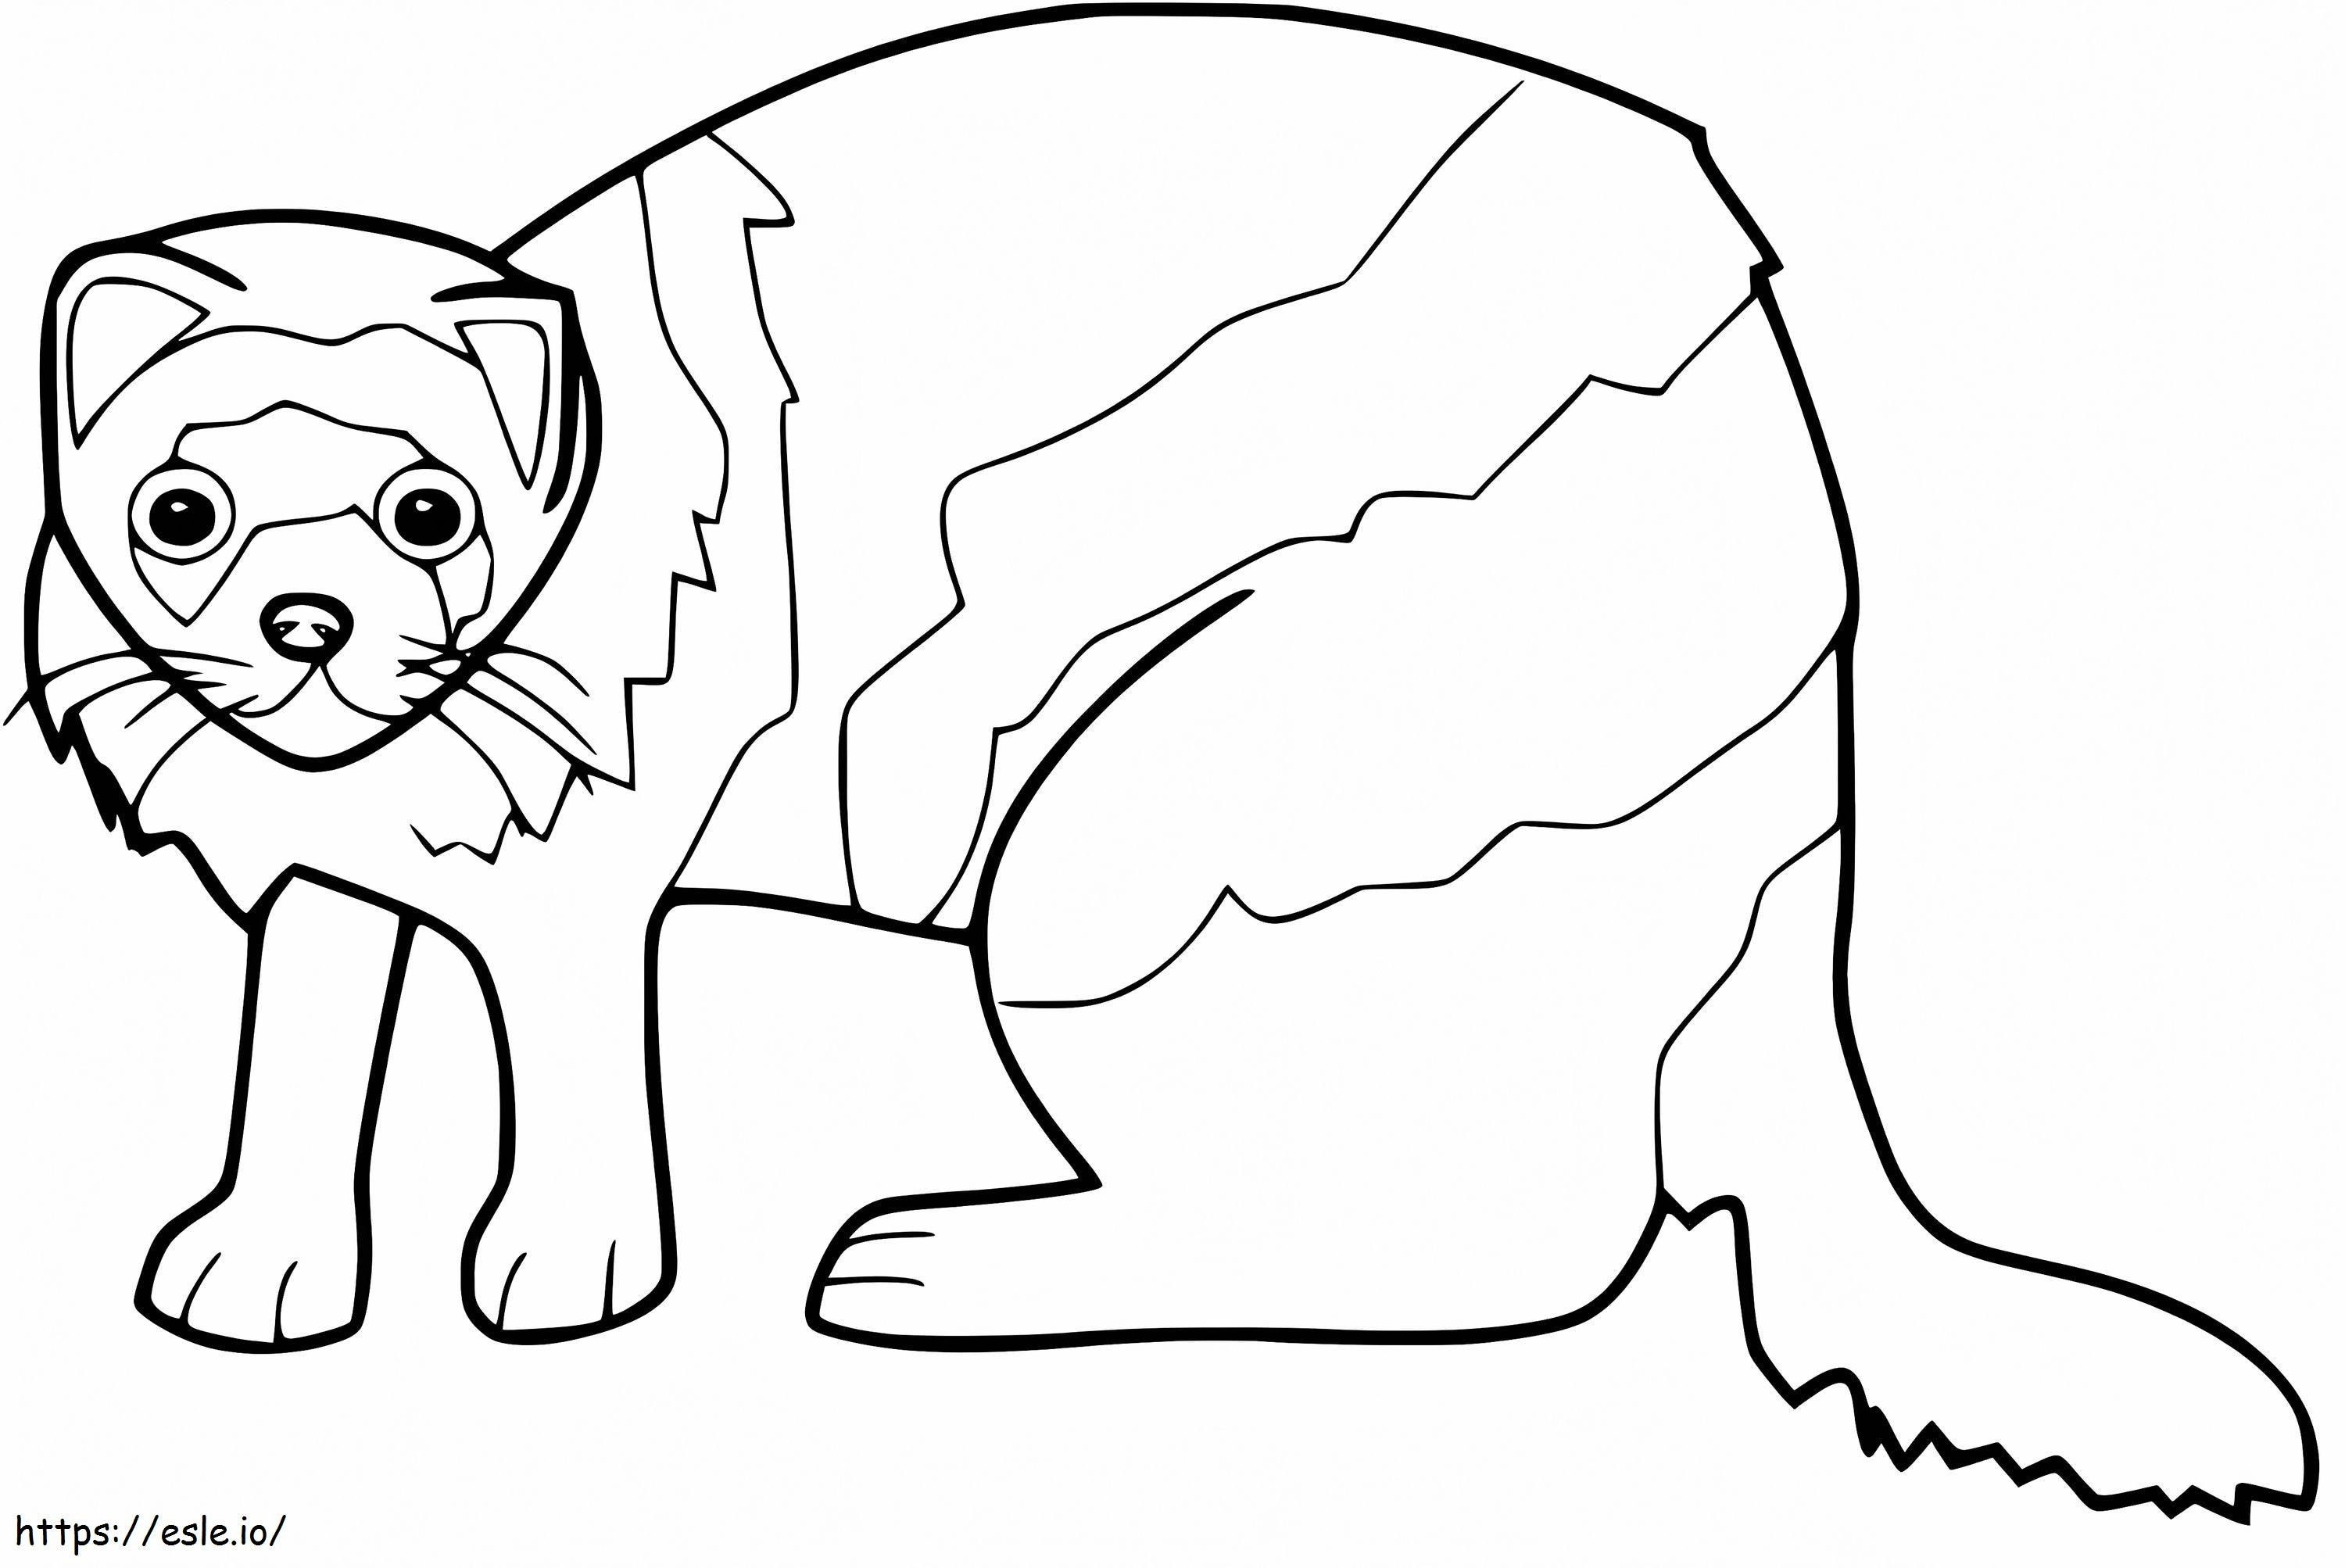 Ferret 13 coloring page